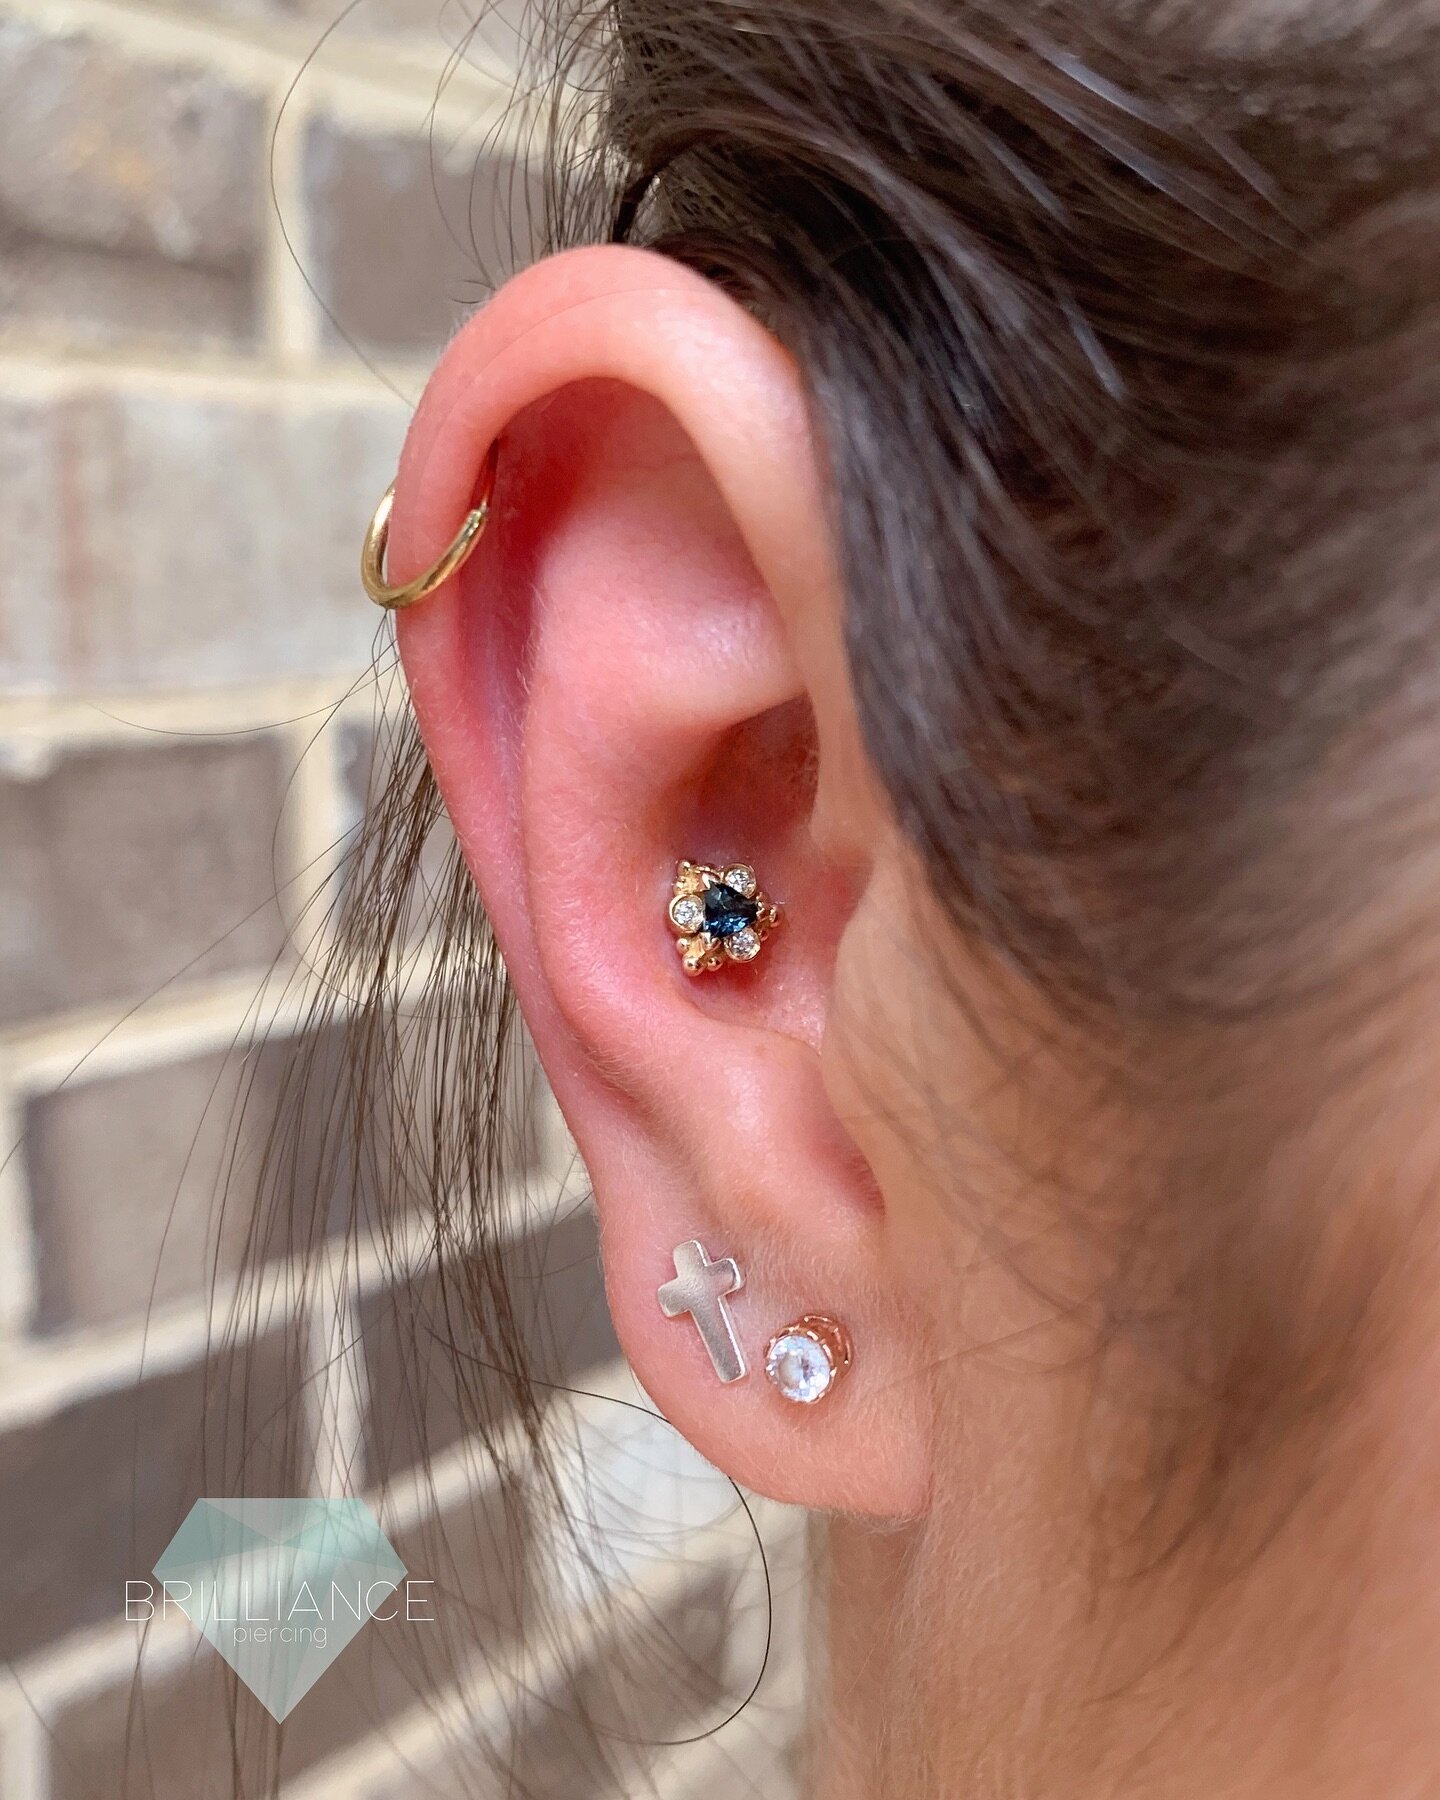 Jen pierced this conch with a London Blue Topaz Helena adding some elegant sparkle 💎💫